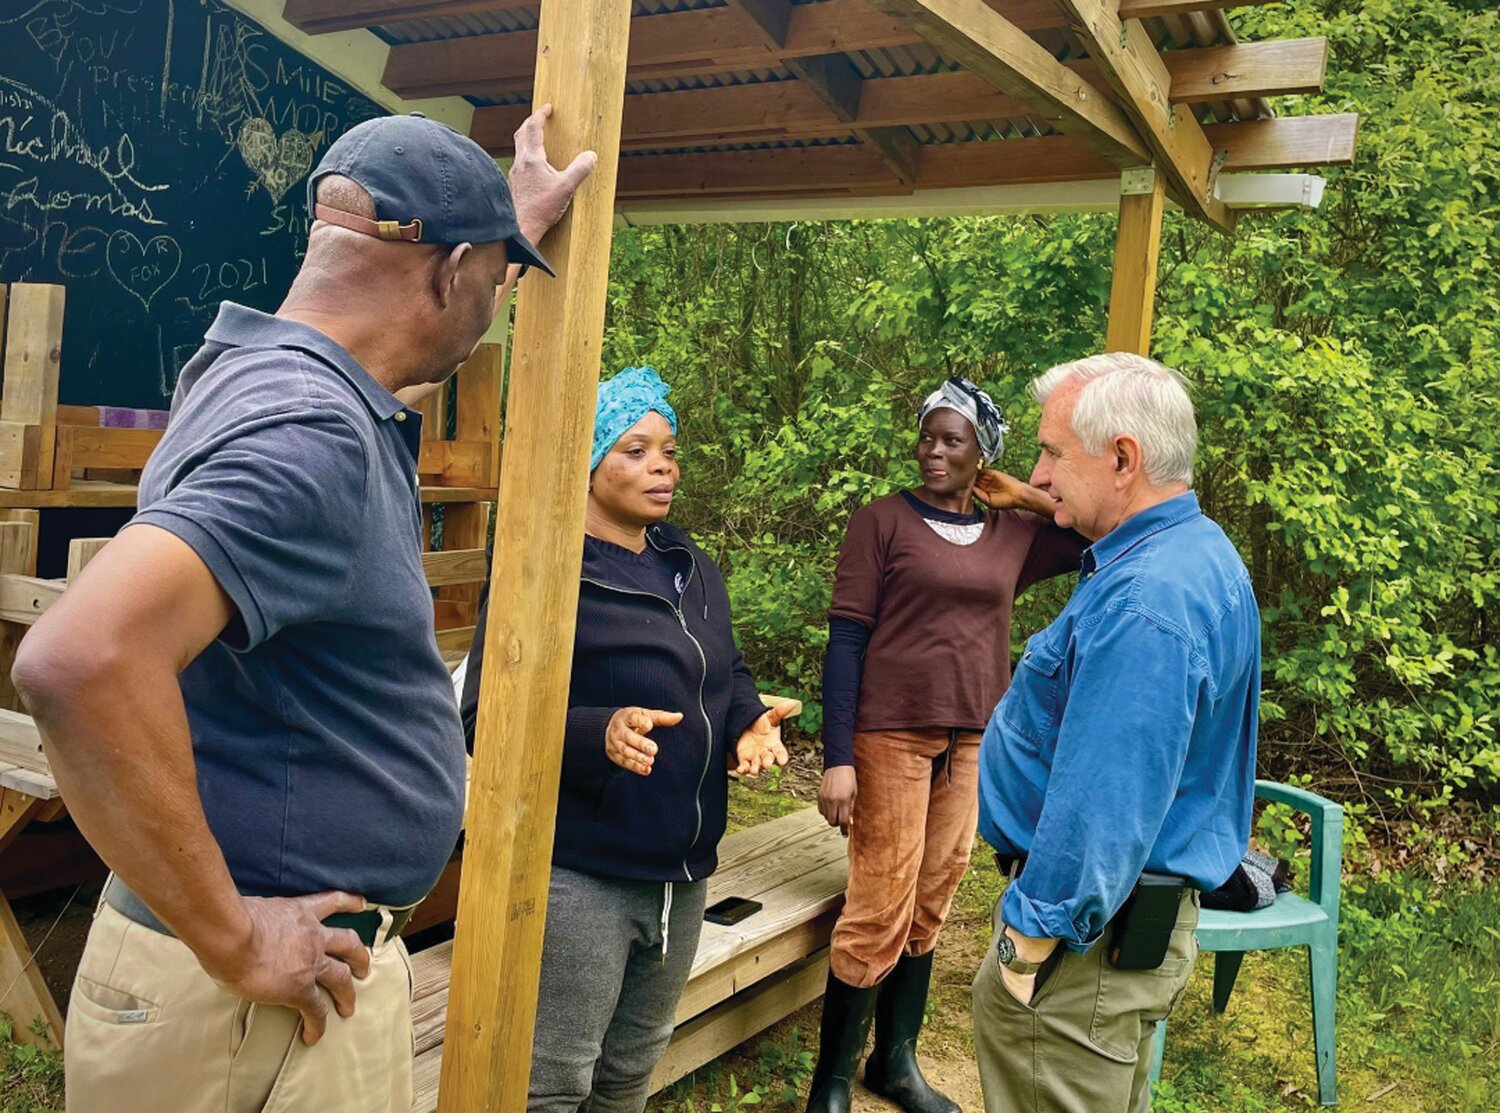 FIGHTING FOR FOOD: On May 19, U.S. Sen. Jack Reed visited Johnston’s Bami Farm. Julius Kolawole, founder of the Rhode Island African Alliance, considers Reed an ally in the global and local food fight.